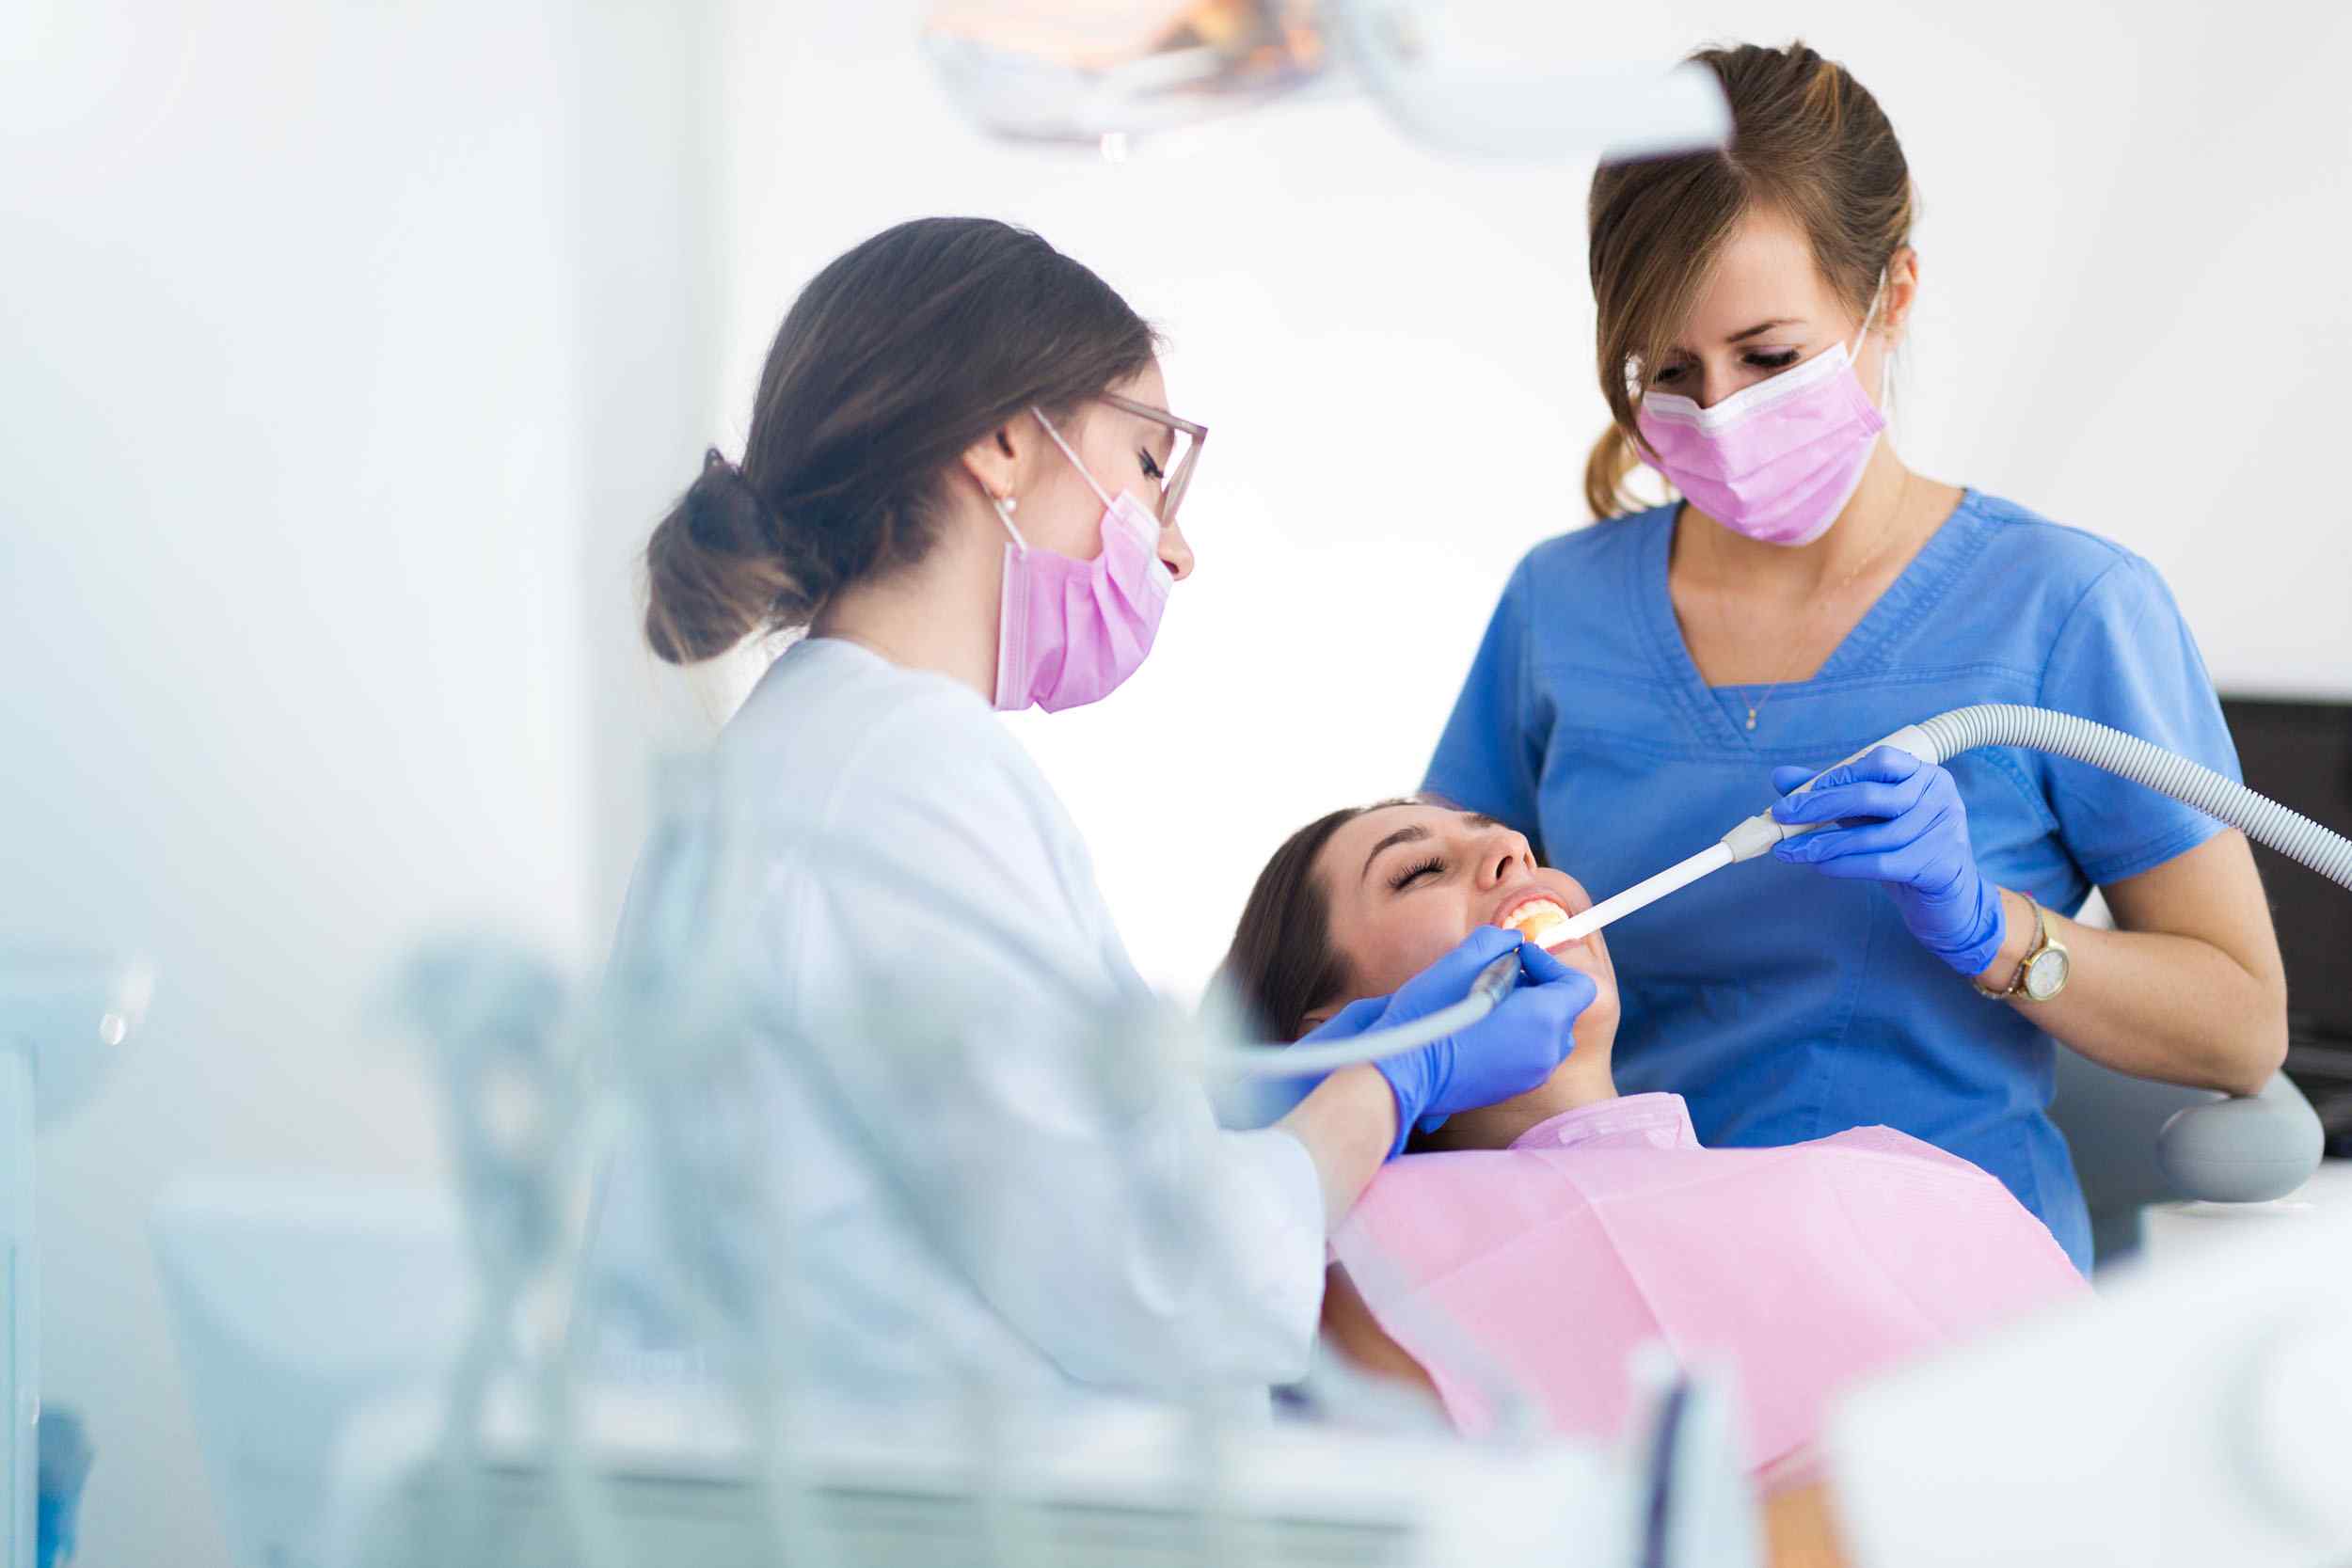 A dentist and two women wearing masks while one of them is holding a tooth brush